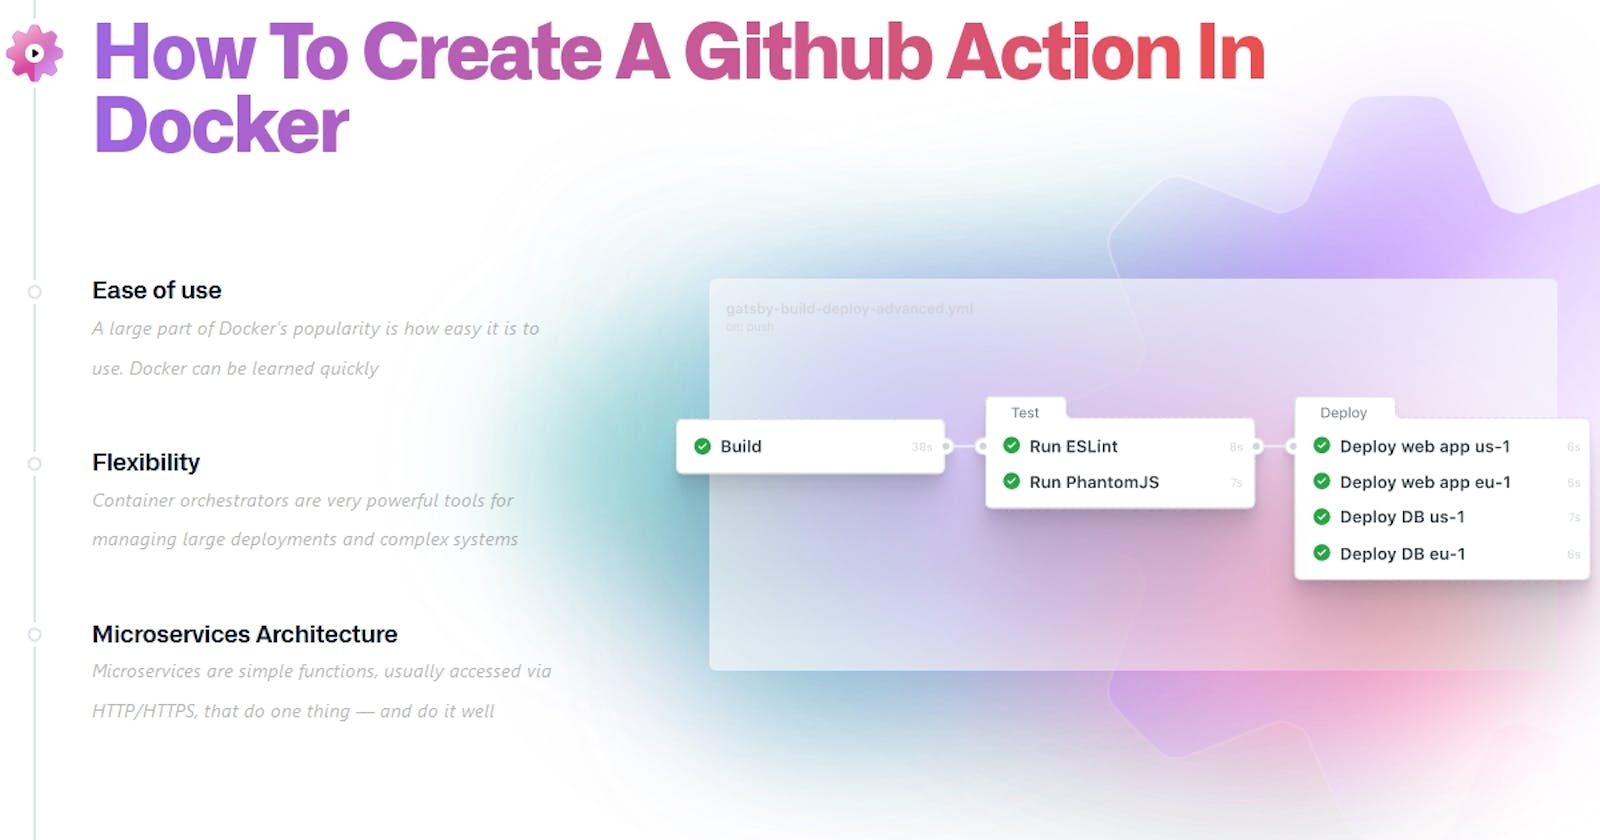 How To Create A Github Action In Docker